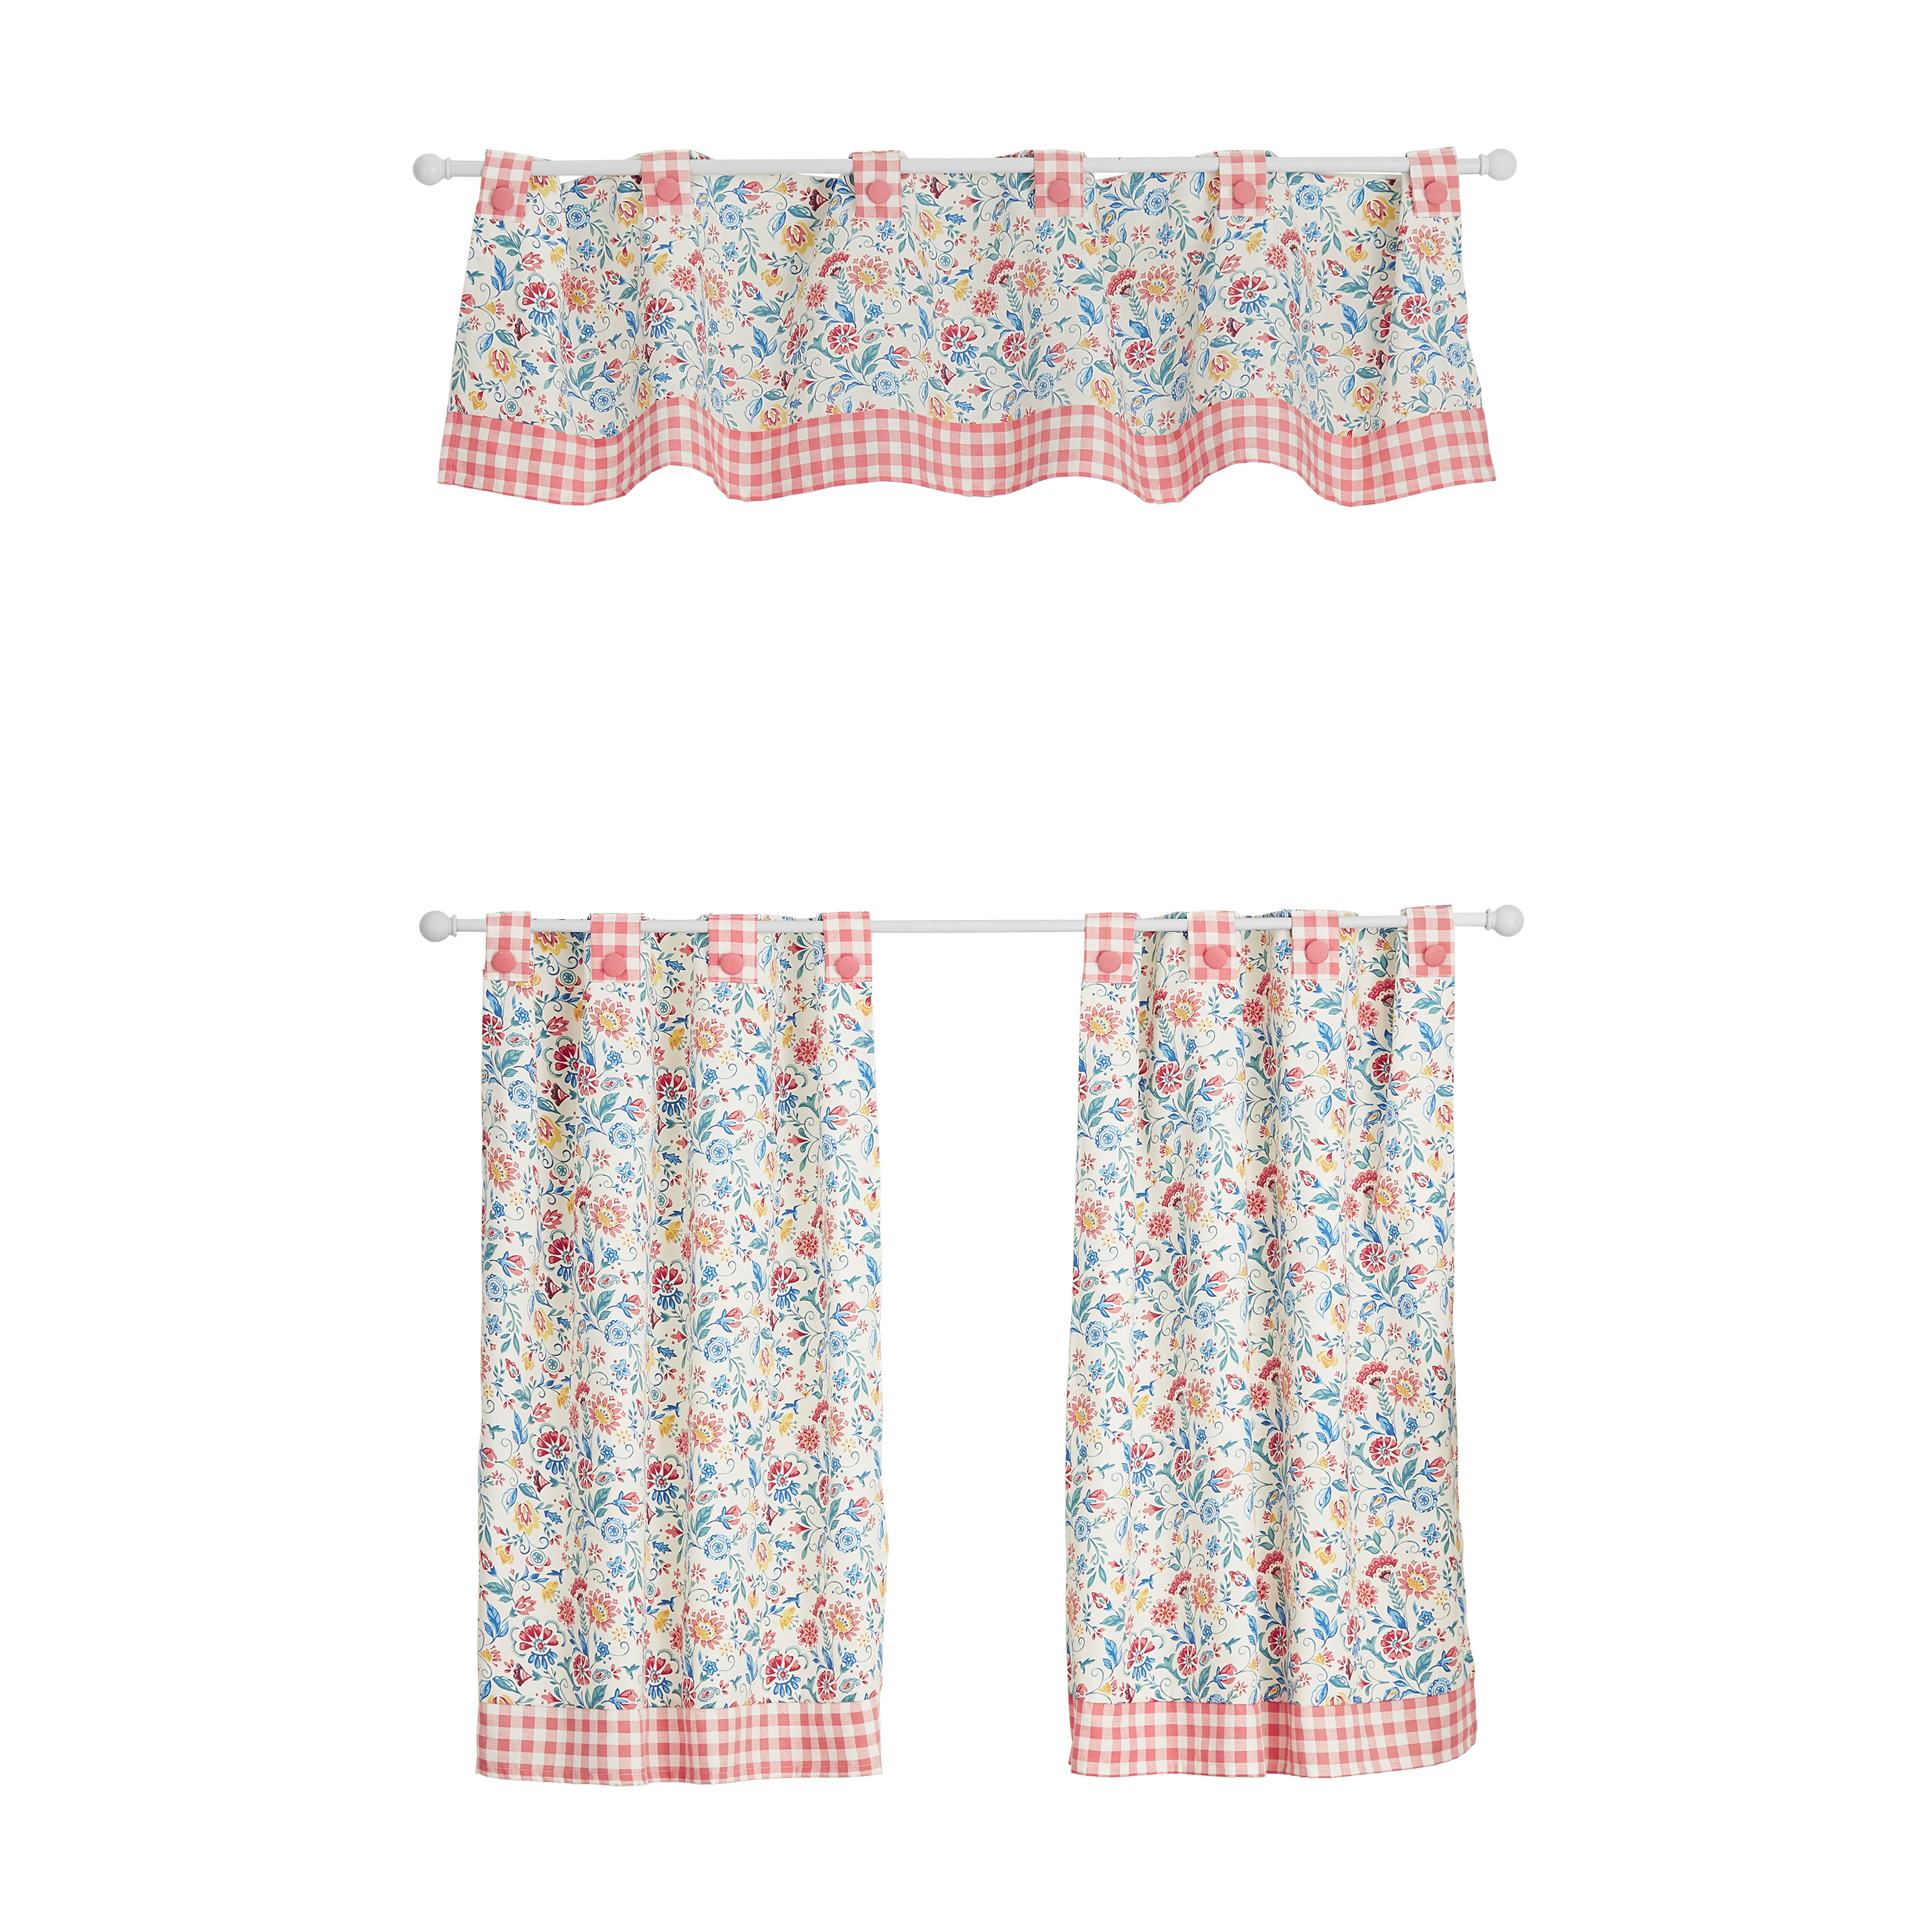 The Pioneer Woman Mazie 3-Piece Floral Tier & Valance Set - image 1 of 5